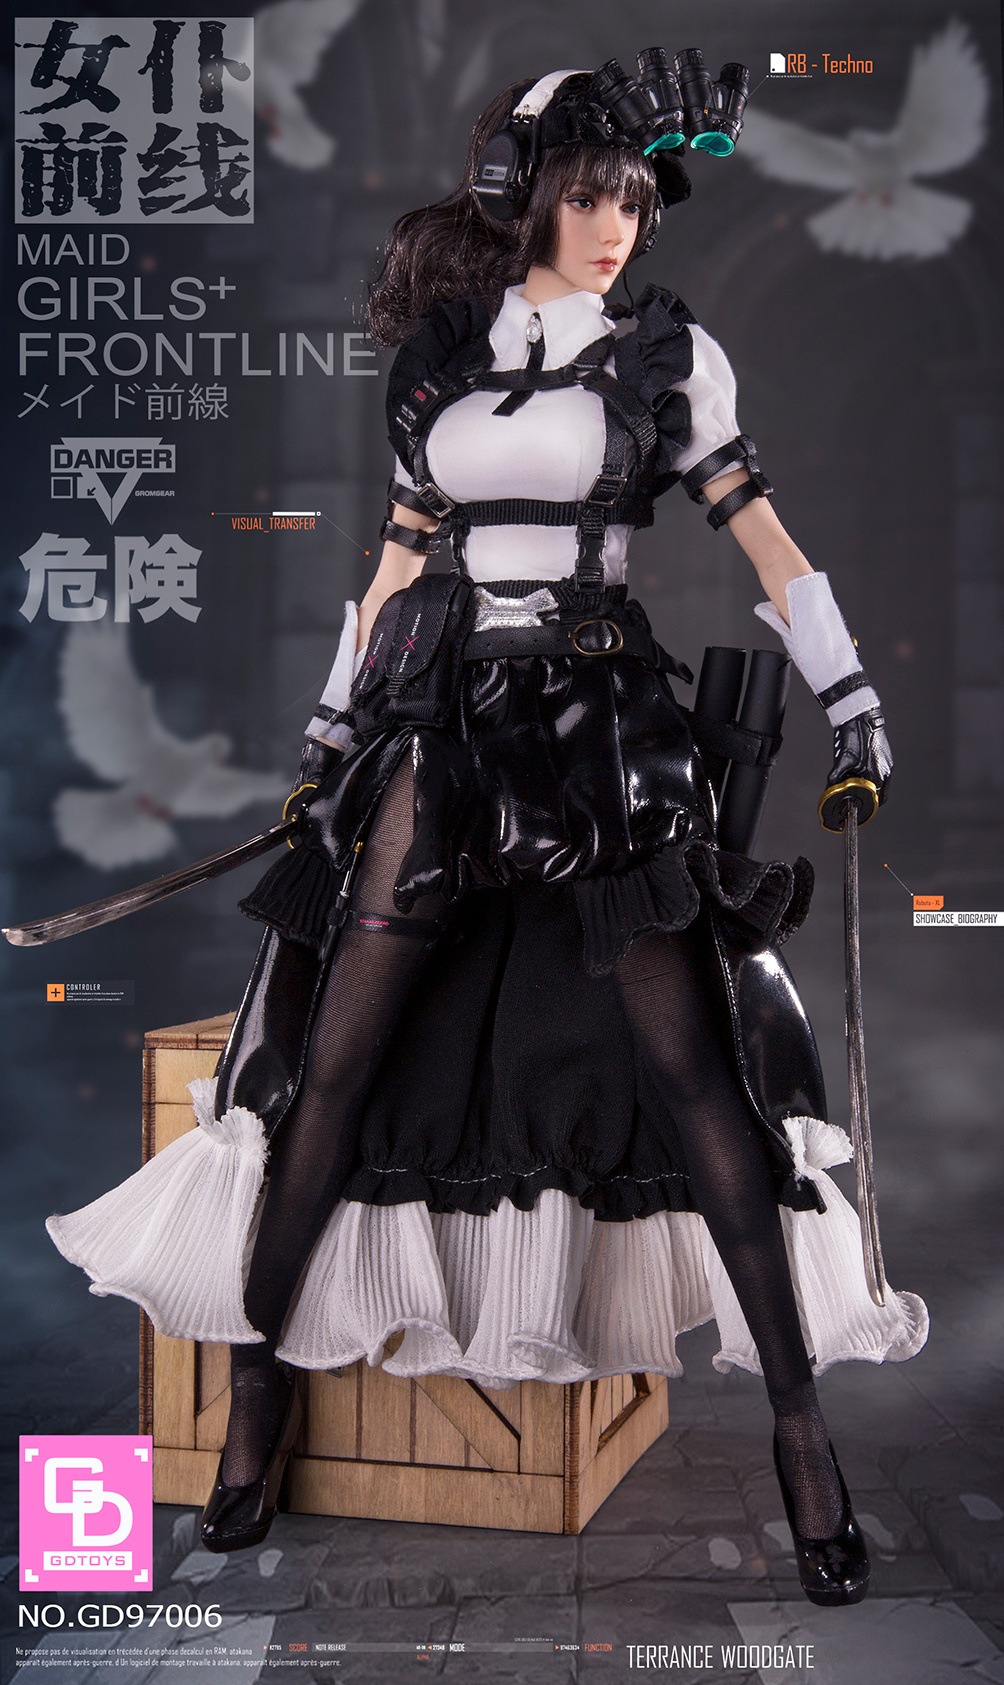 military-fantasy - NEW PRODUCT: GDTOYS: GD97006 1/6 Scale Maid Girls+ Frontline - YULIA 22563910